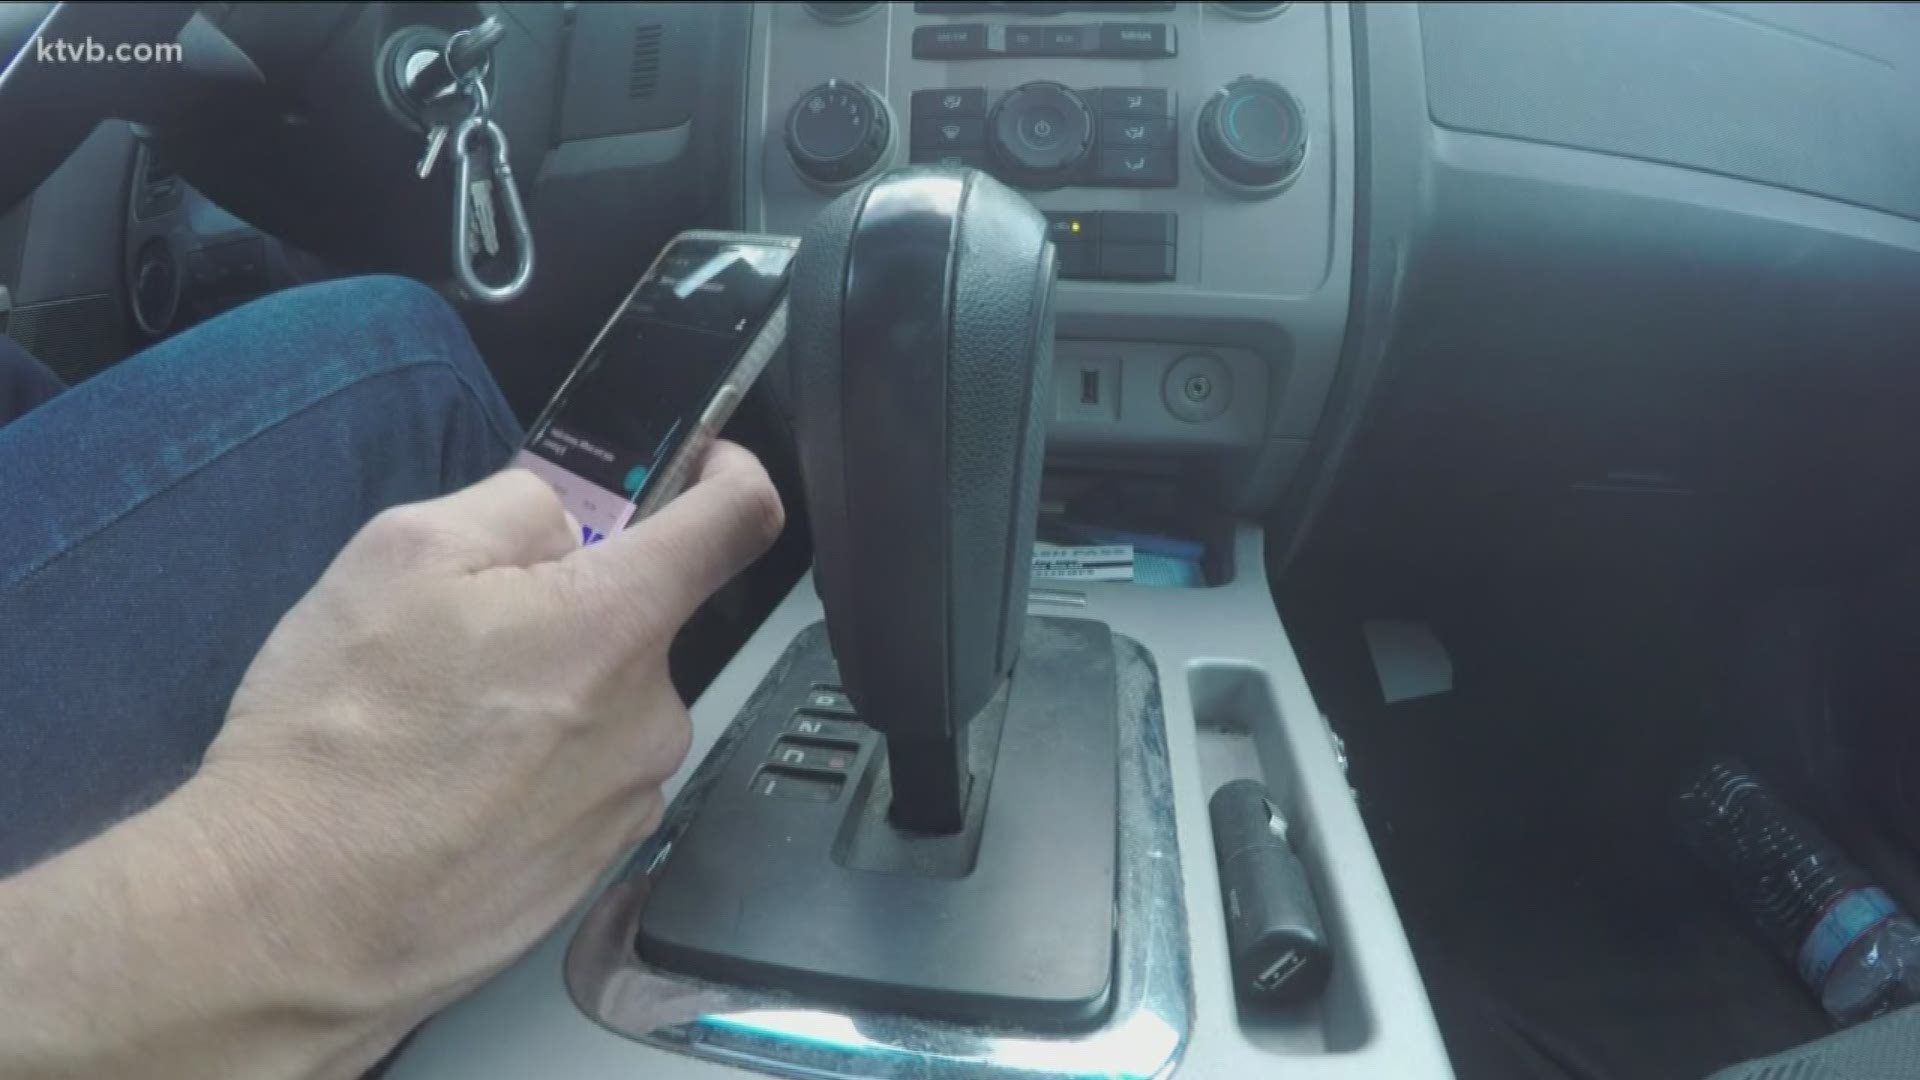 The Boise City Council unanimously approved a hands-free ordinance Tuesday night.